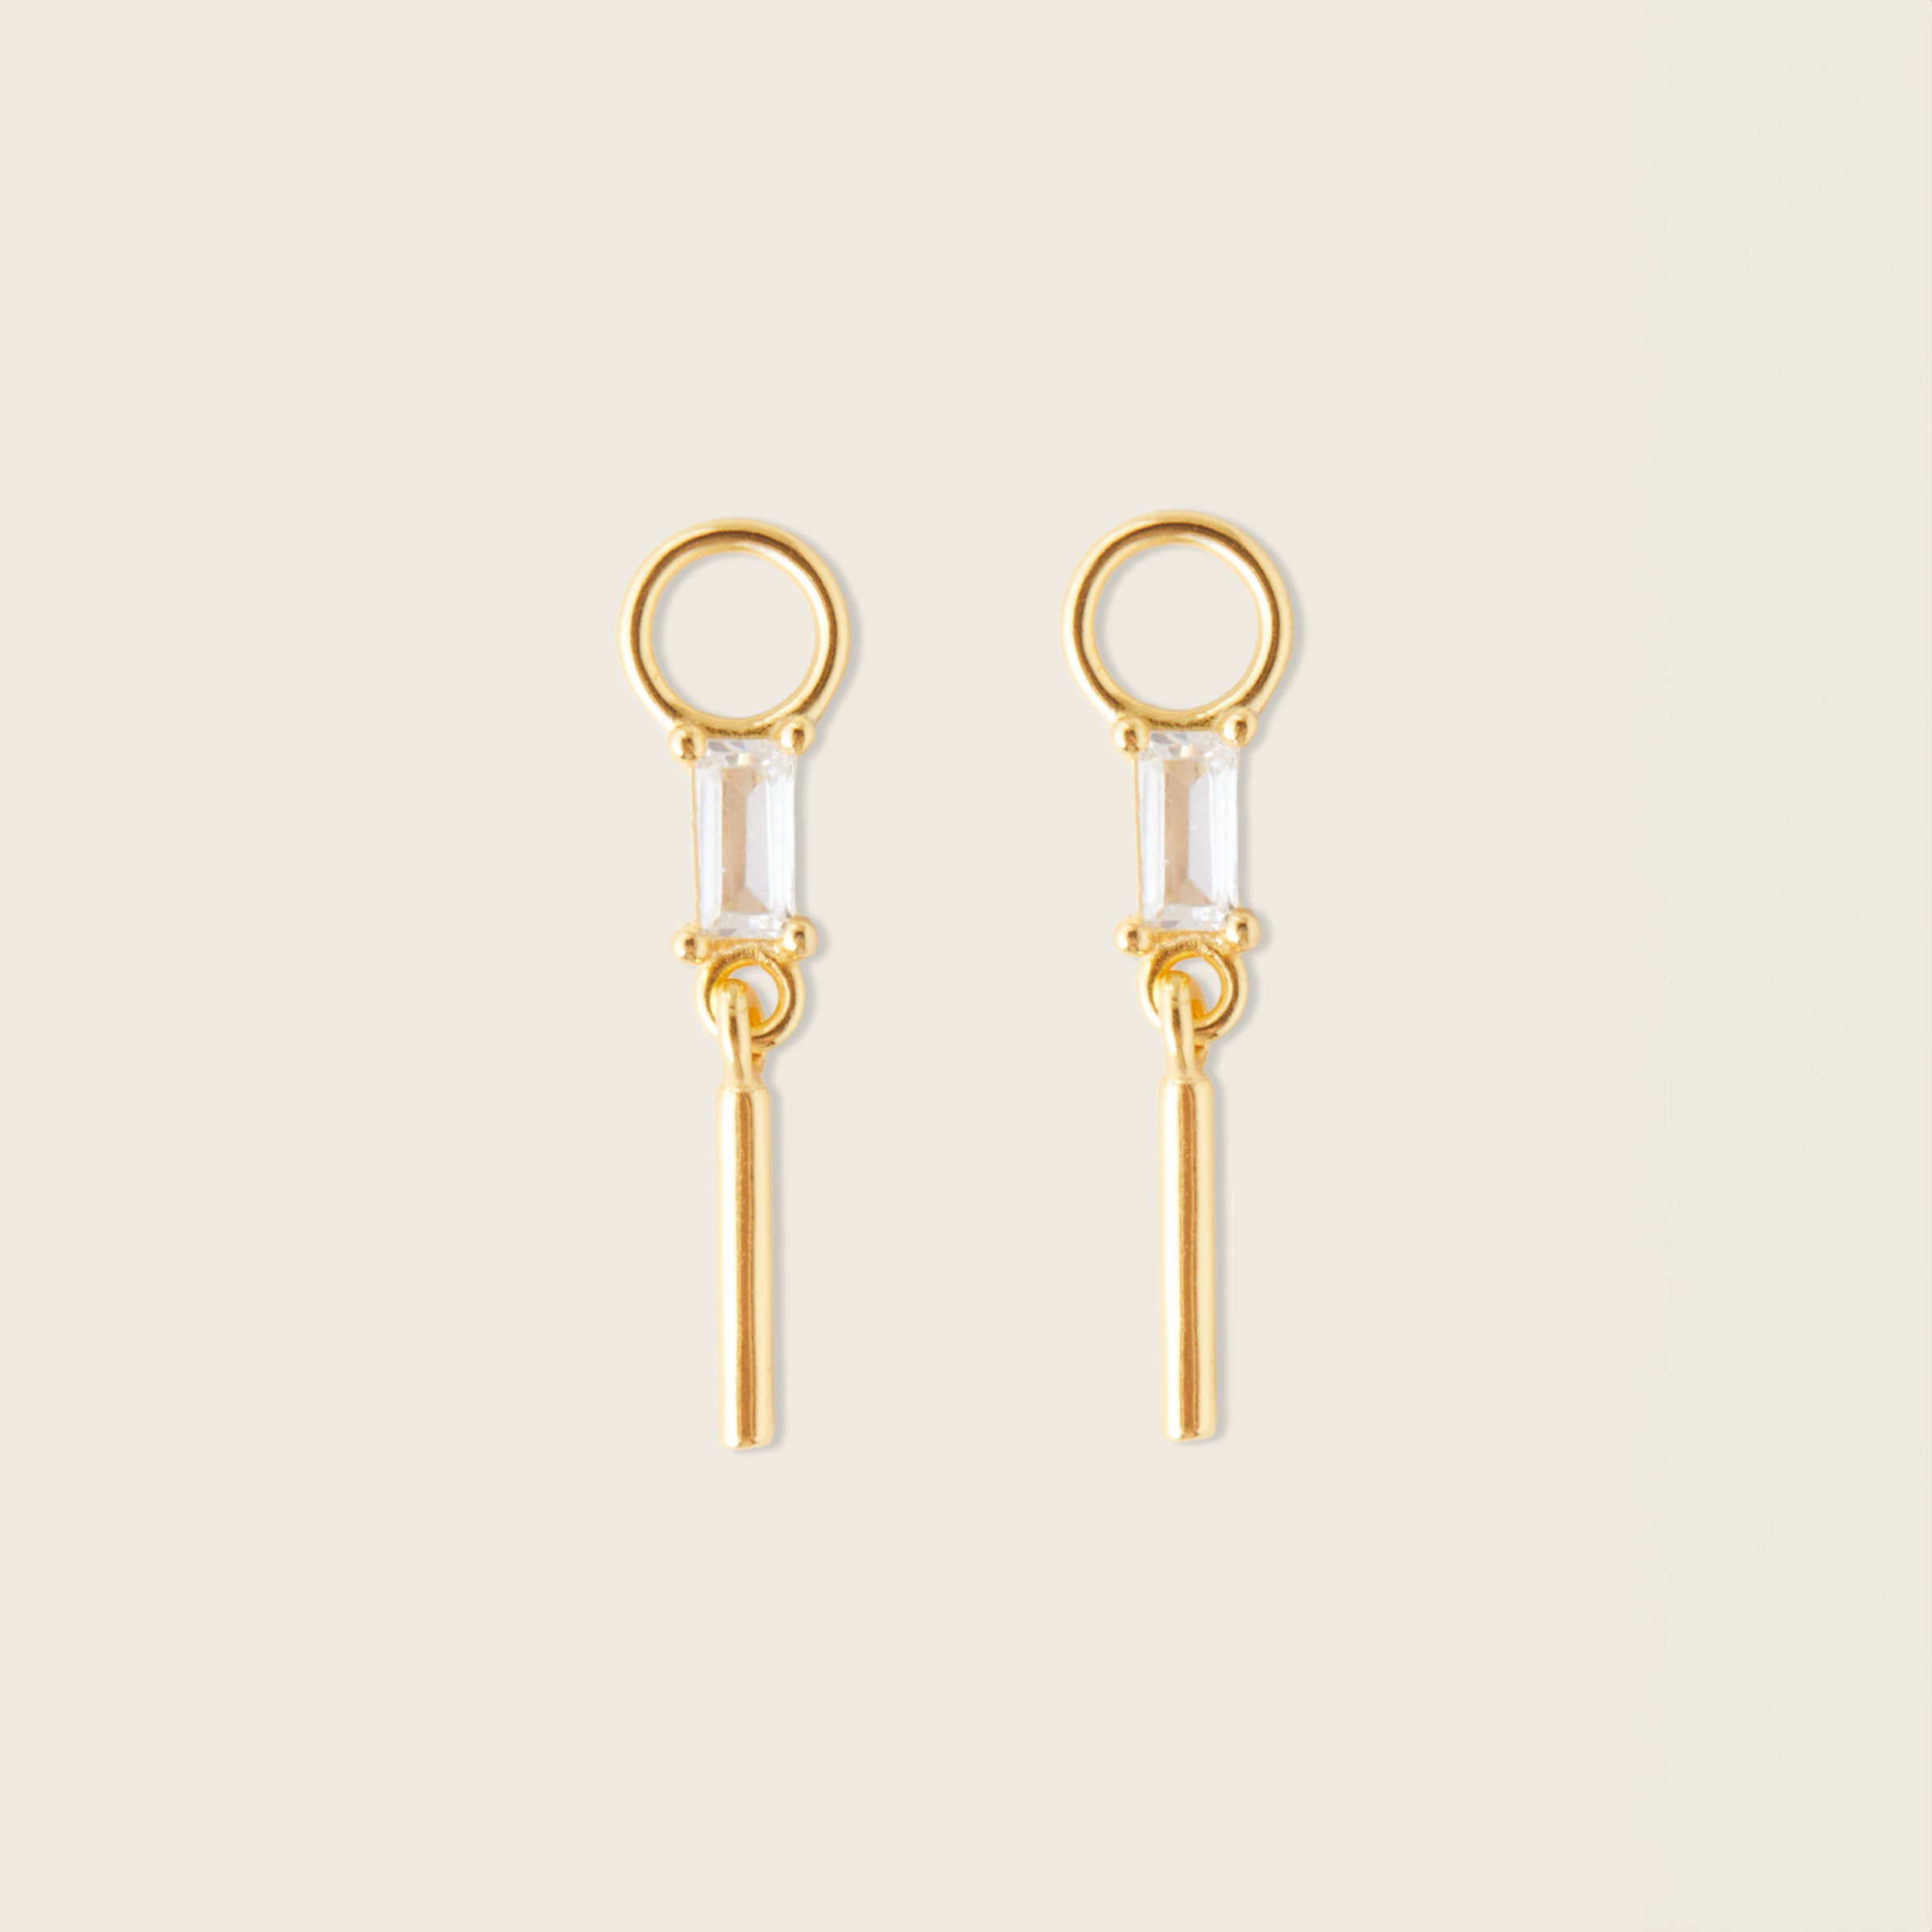 Image of the Rectangle Drop Hoop Charms are made with high-quality materials, including 18K gold plating over 925 Sterling Silver. These charms are both non-tarnish and water resistant. The perfect combination of style and durability.